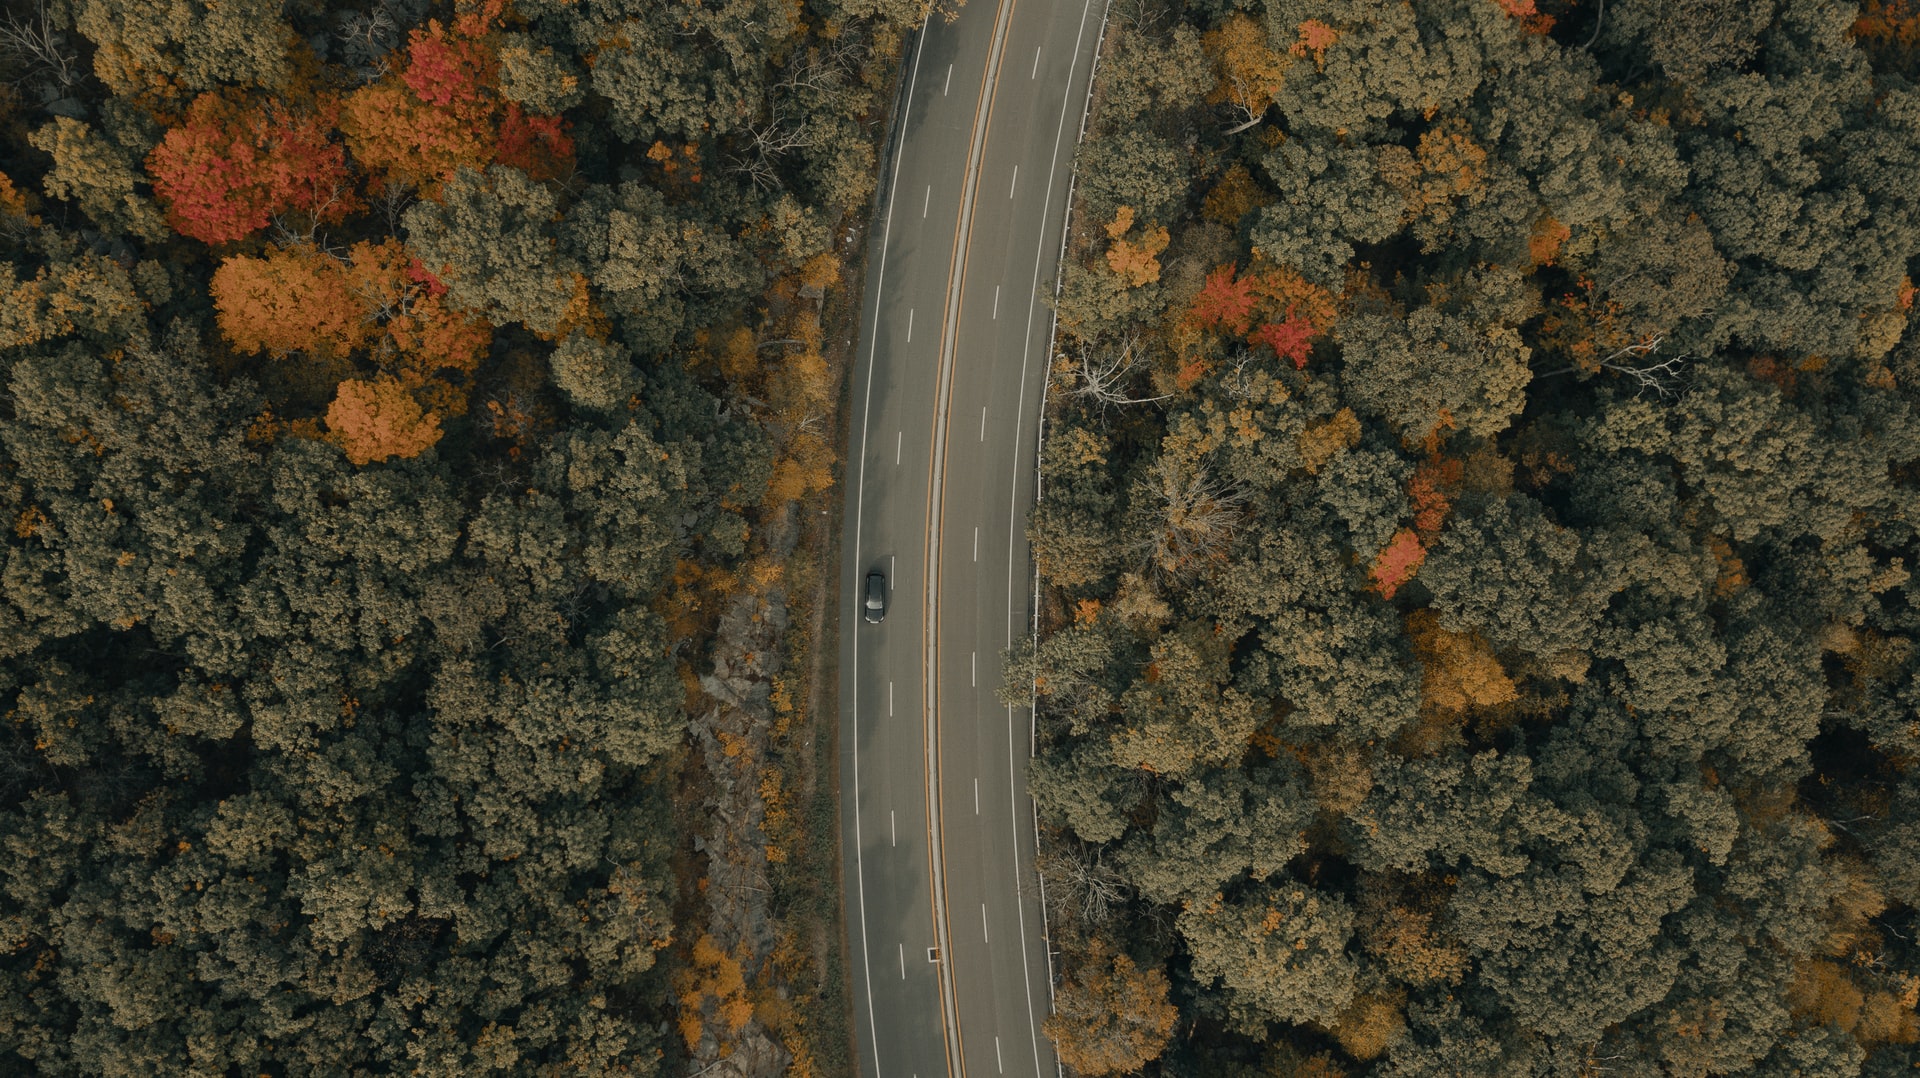 An ariel photo of a car driving down a road surronded by trees.